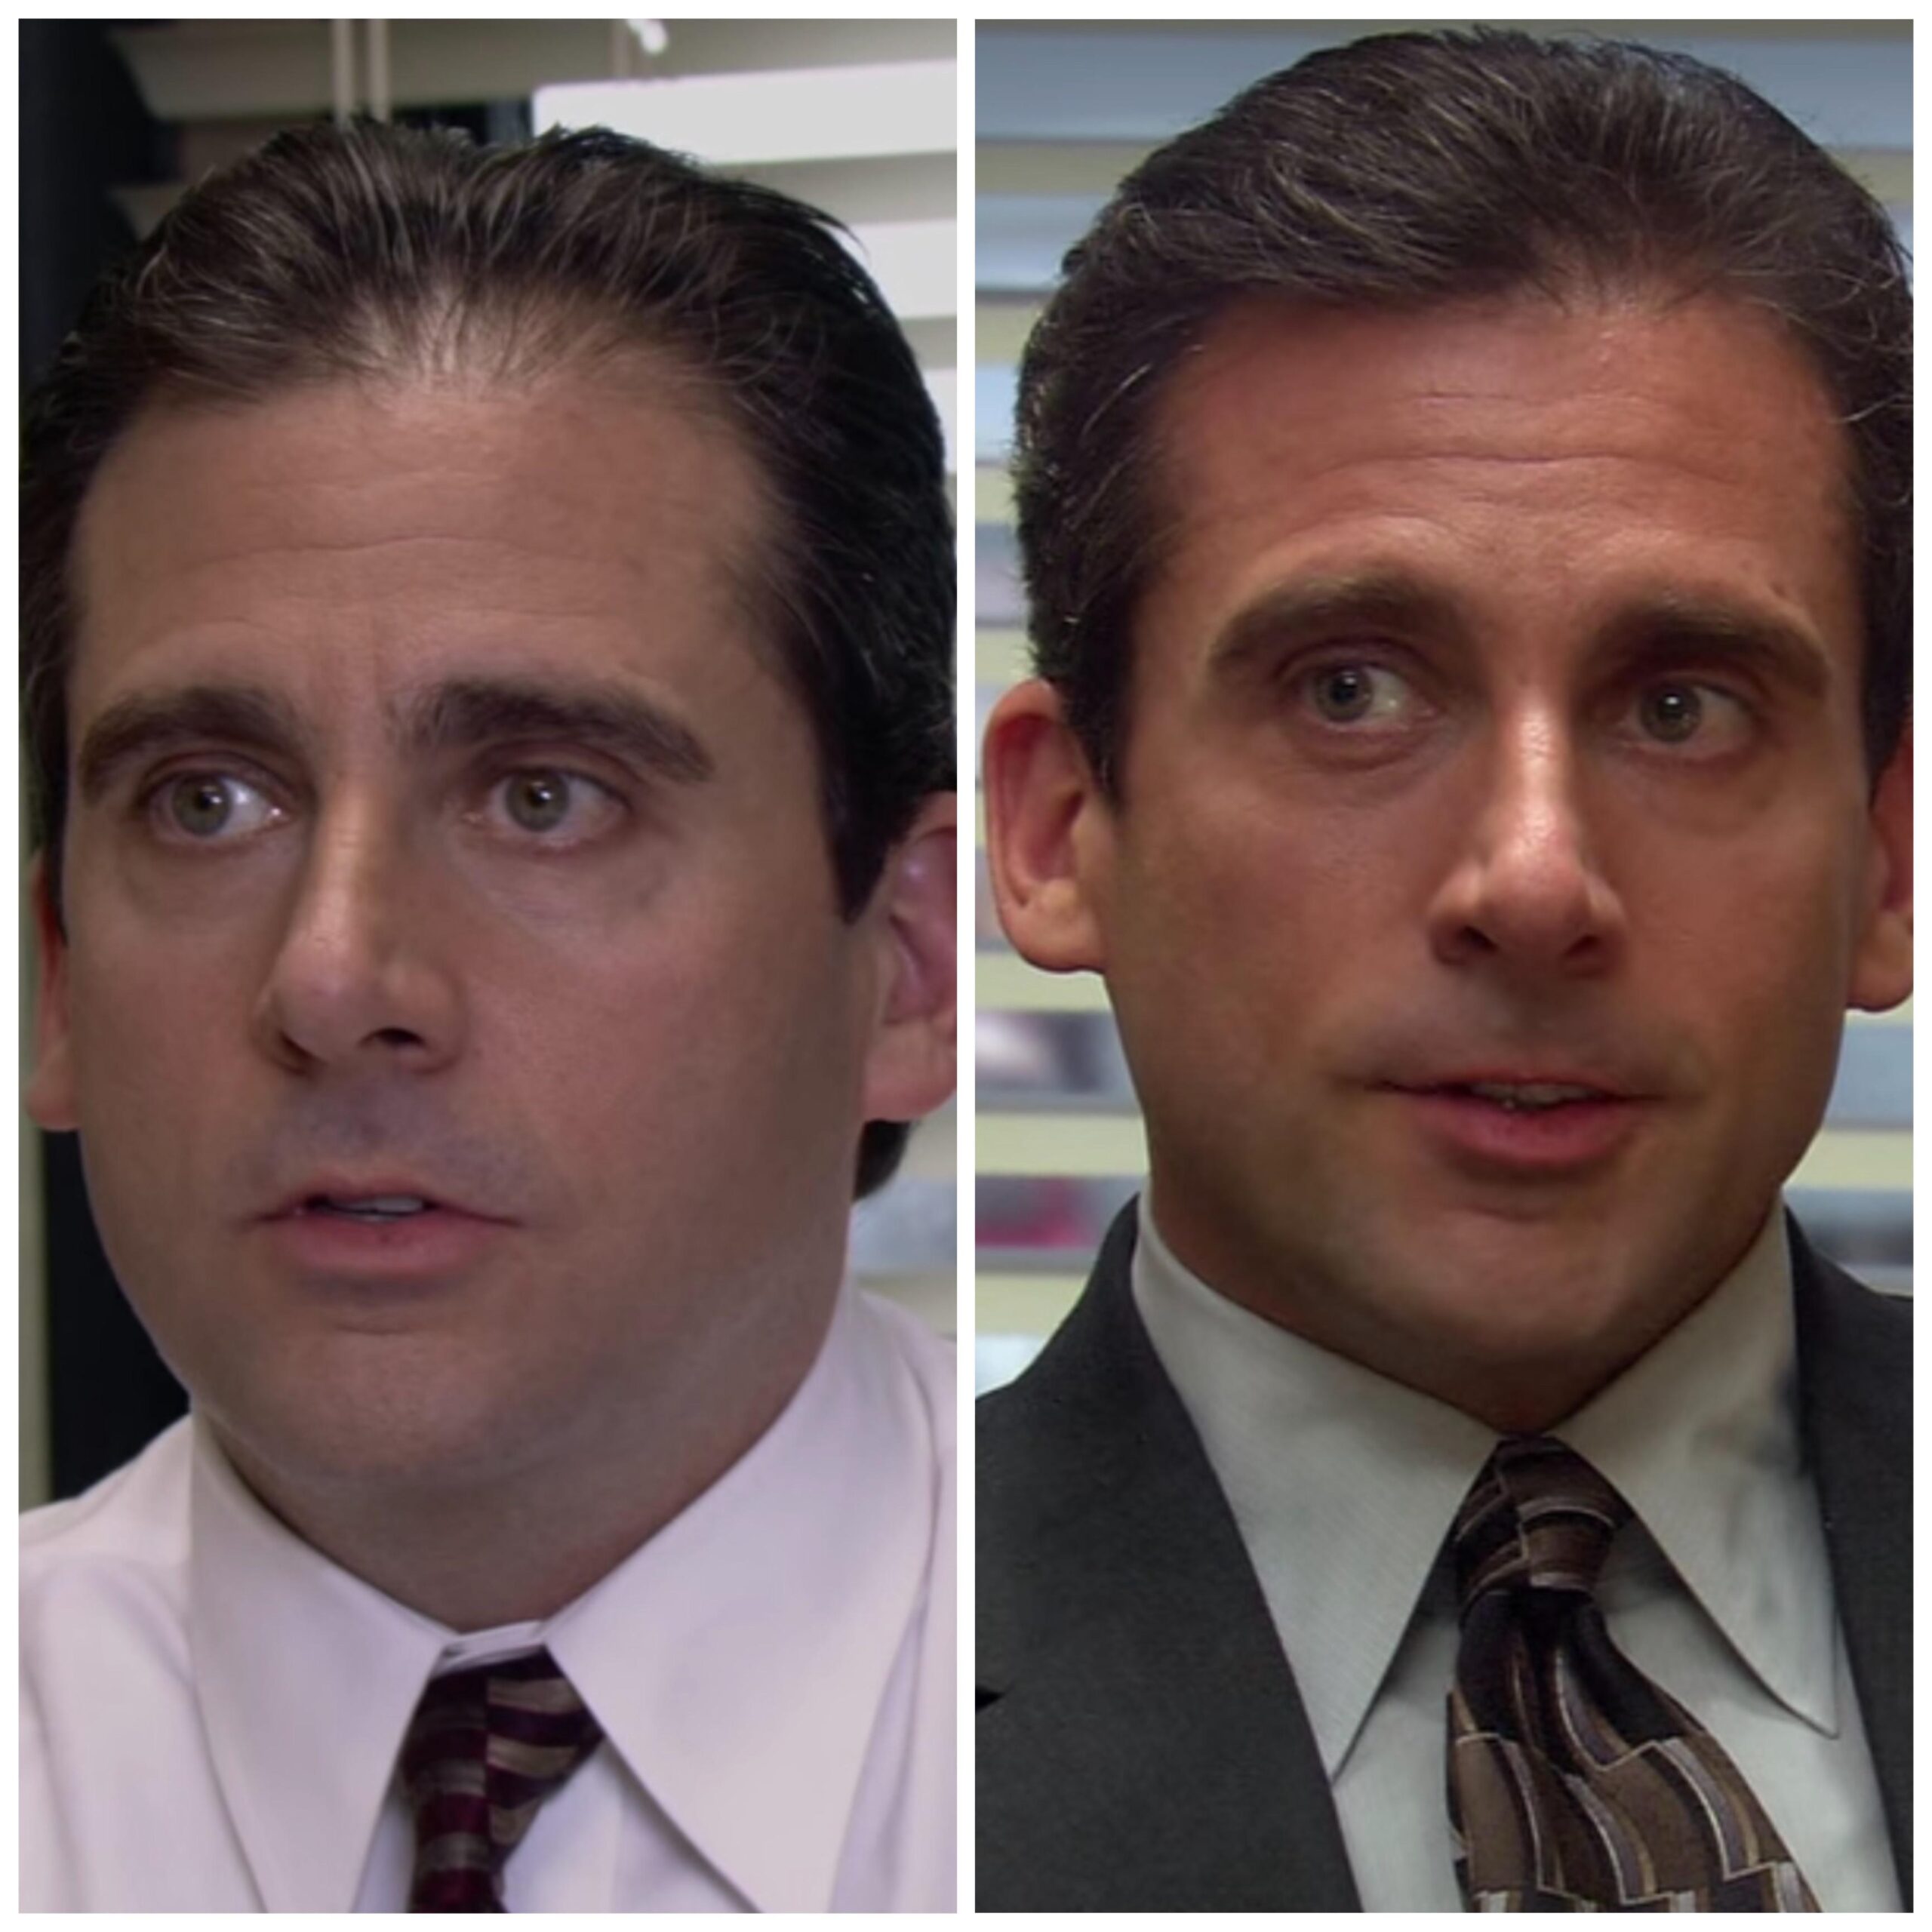 The change noticed in Steve Carell's hair before (L) and after the first season of The Office